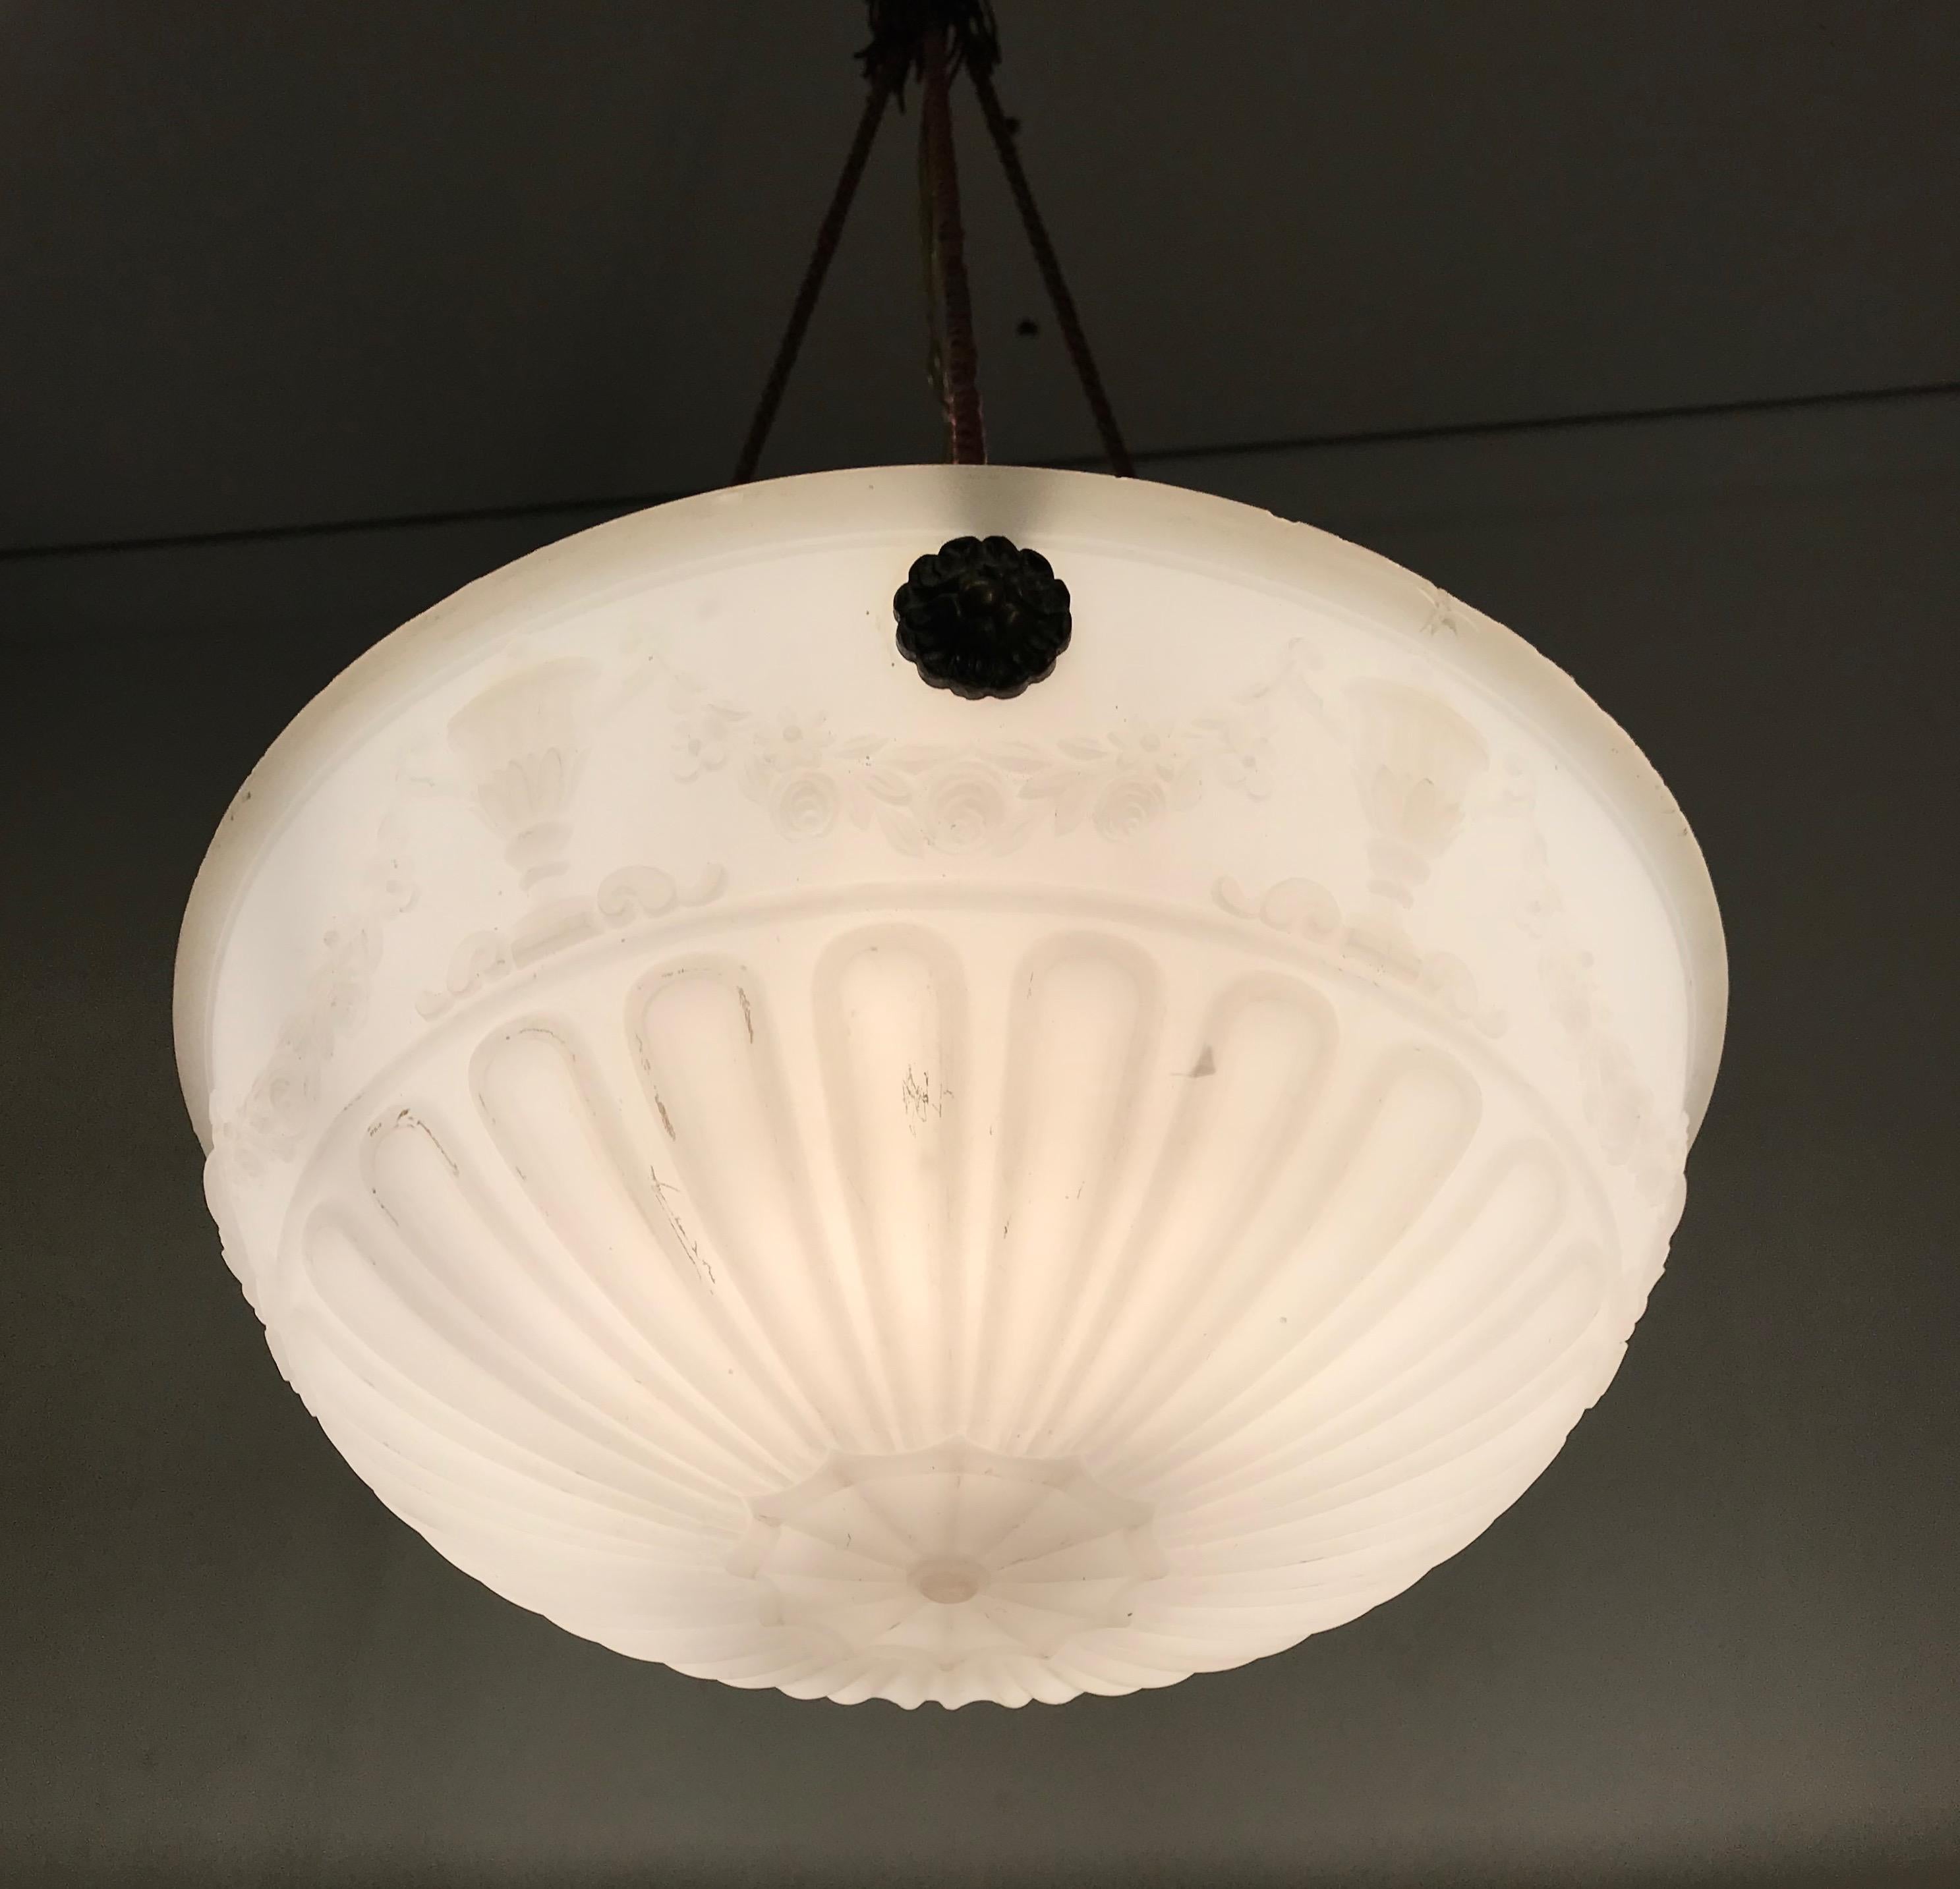 Stylish and practical size 1920s ceiling lamp.

This rare and thick glass shade pendant comes with a number of striking, neoclassical features that make this wonderful light fixture an absolute joy to own and look at. Especially with the light